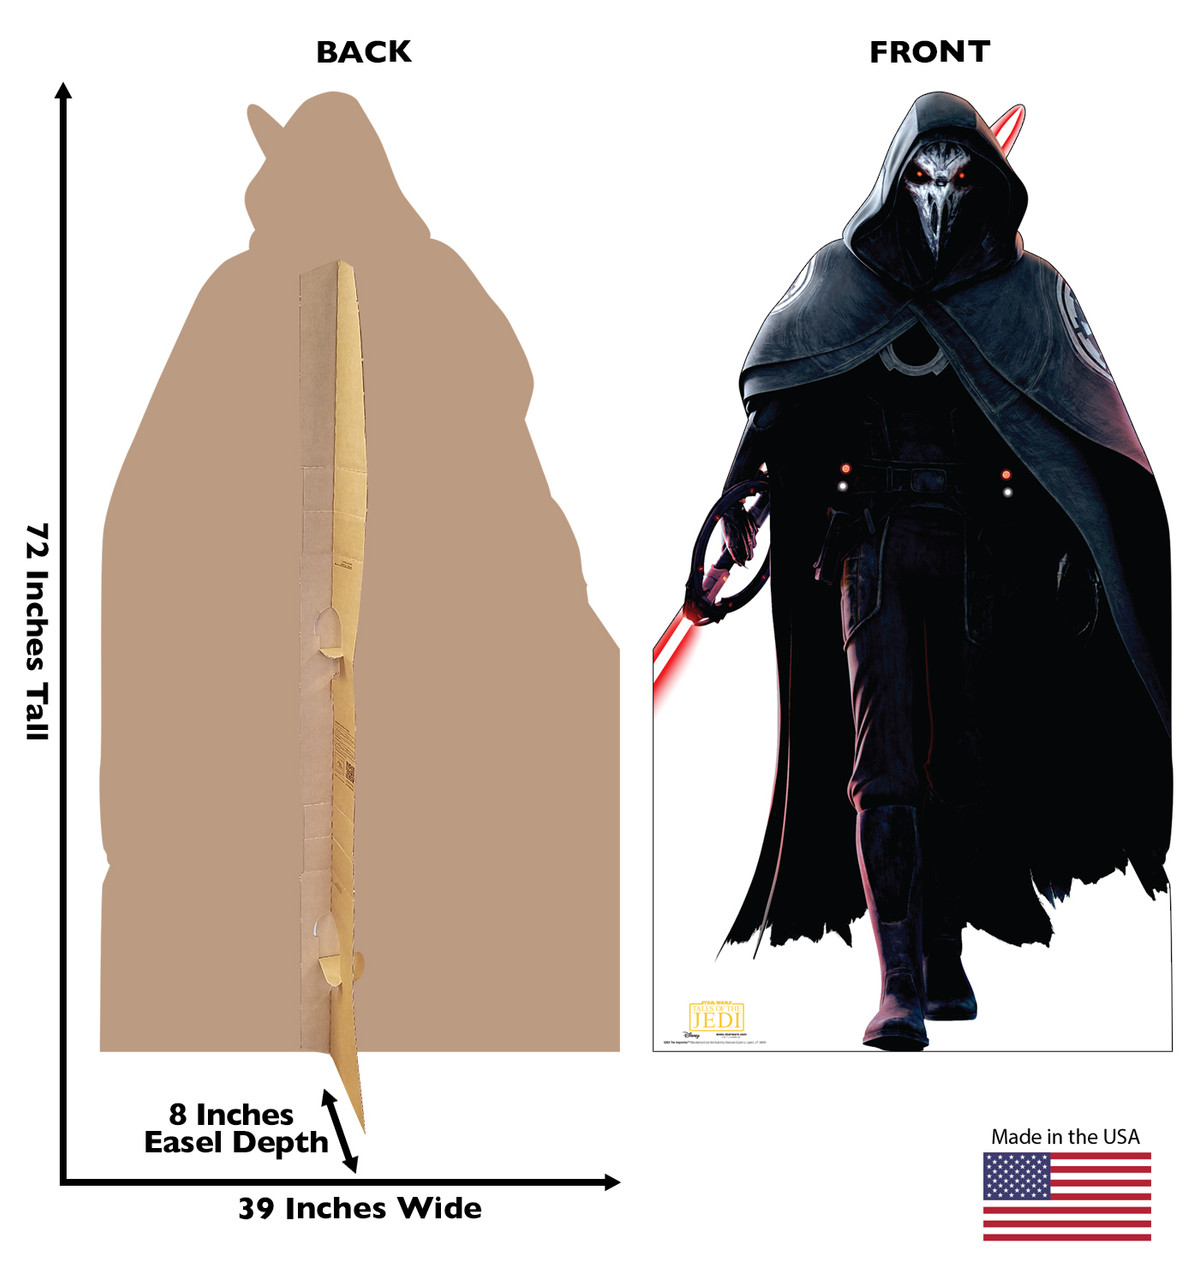 Life-size cardboard standee of The Inquisitor with back and front dimensions.